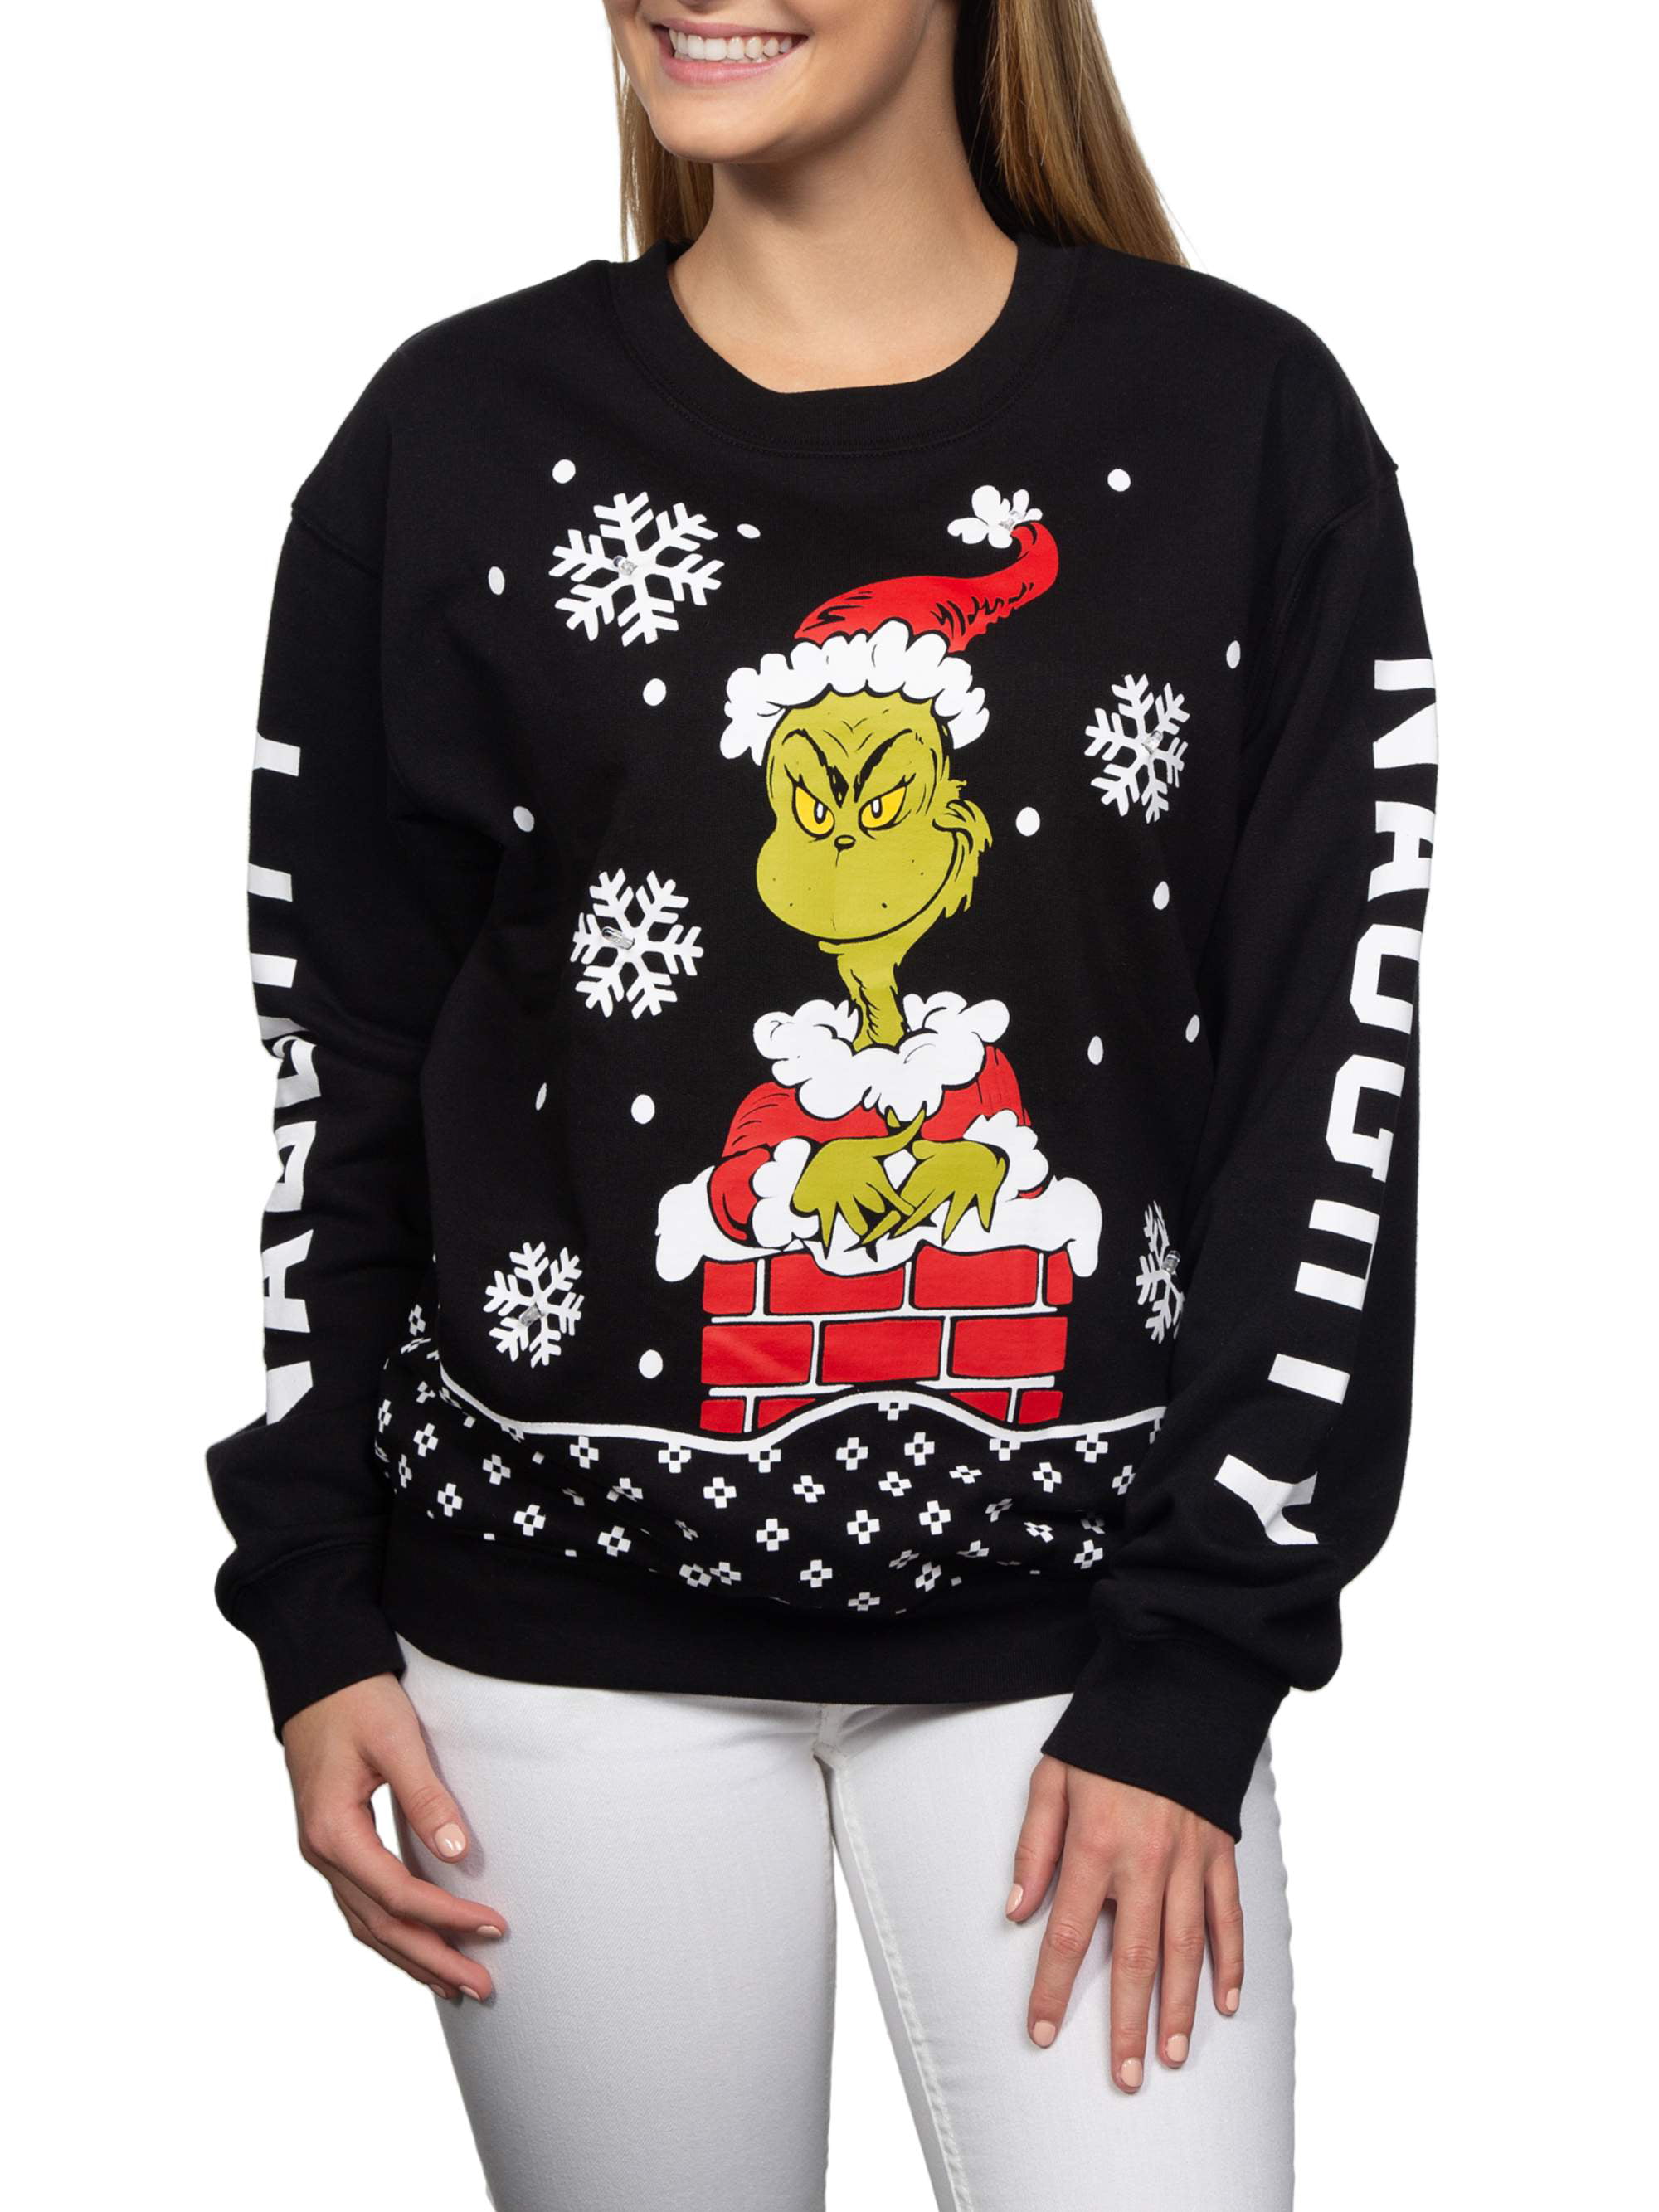 Holiday Sweatshirts Whats Up Grinches Sweatshirts Grinches Christmas Sweatshirts Funny Christmas Sweatshirts,Grinces,Christmas Sweatshirt